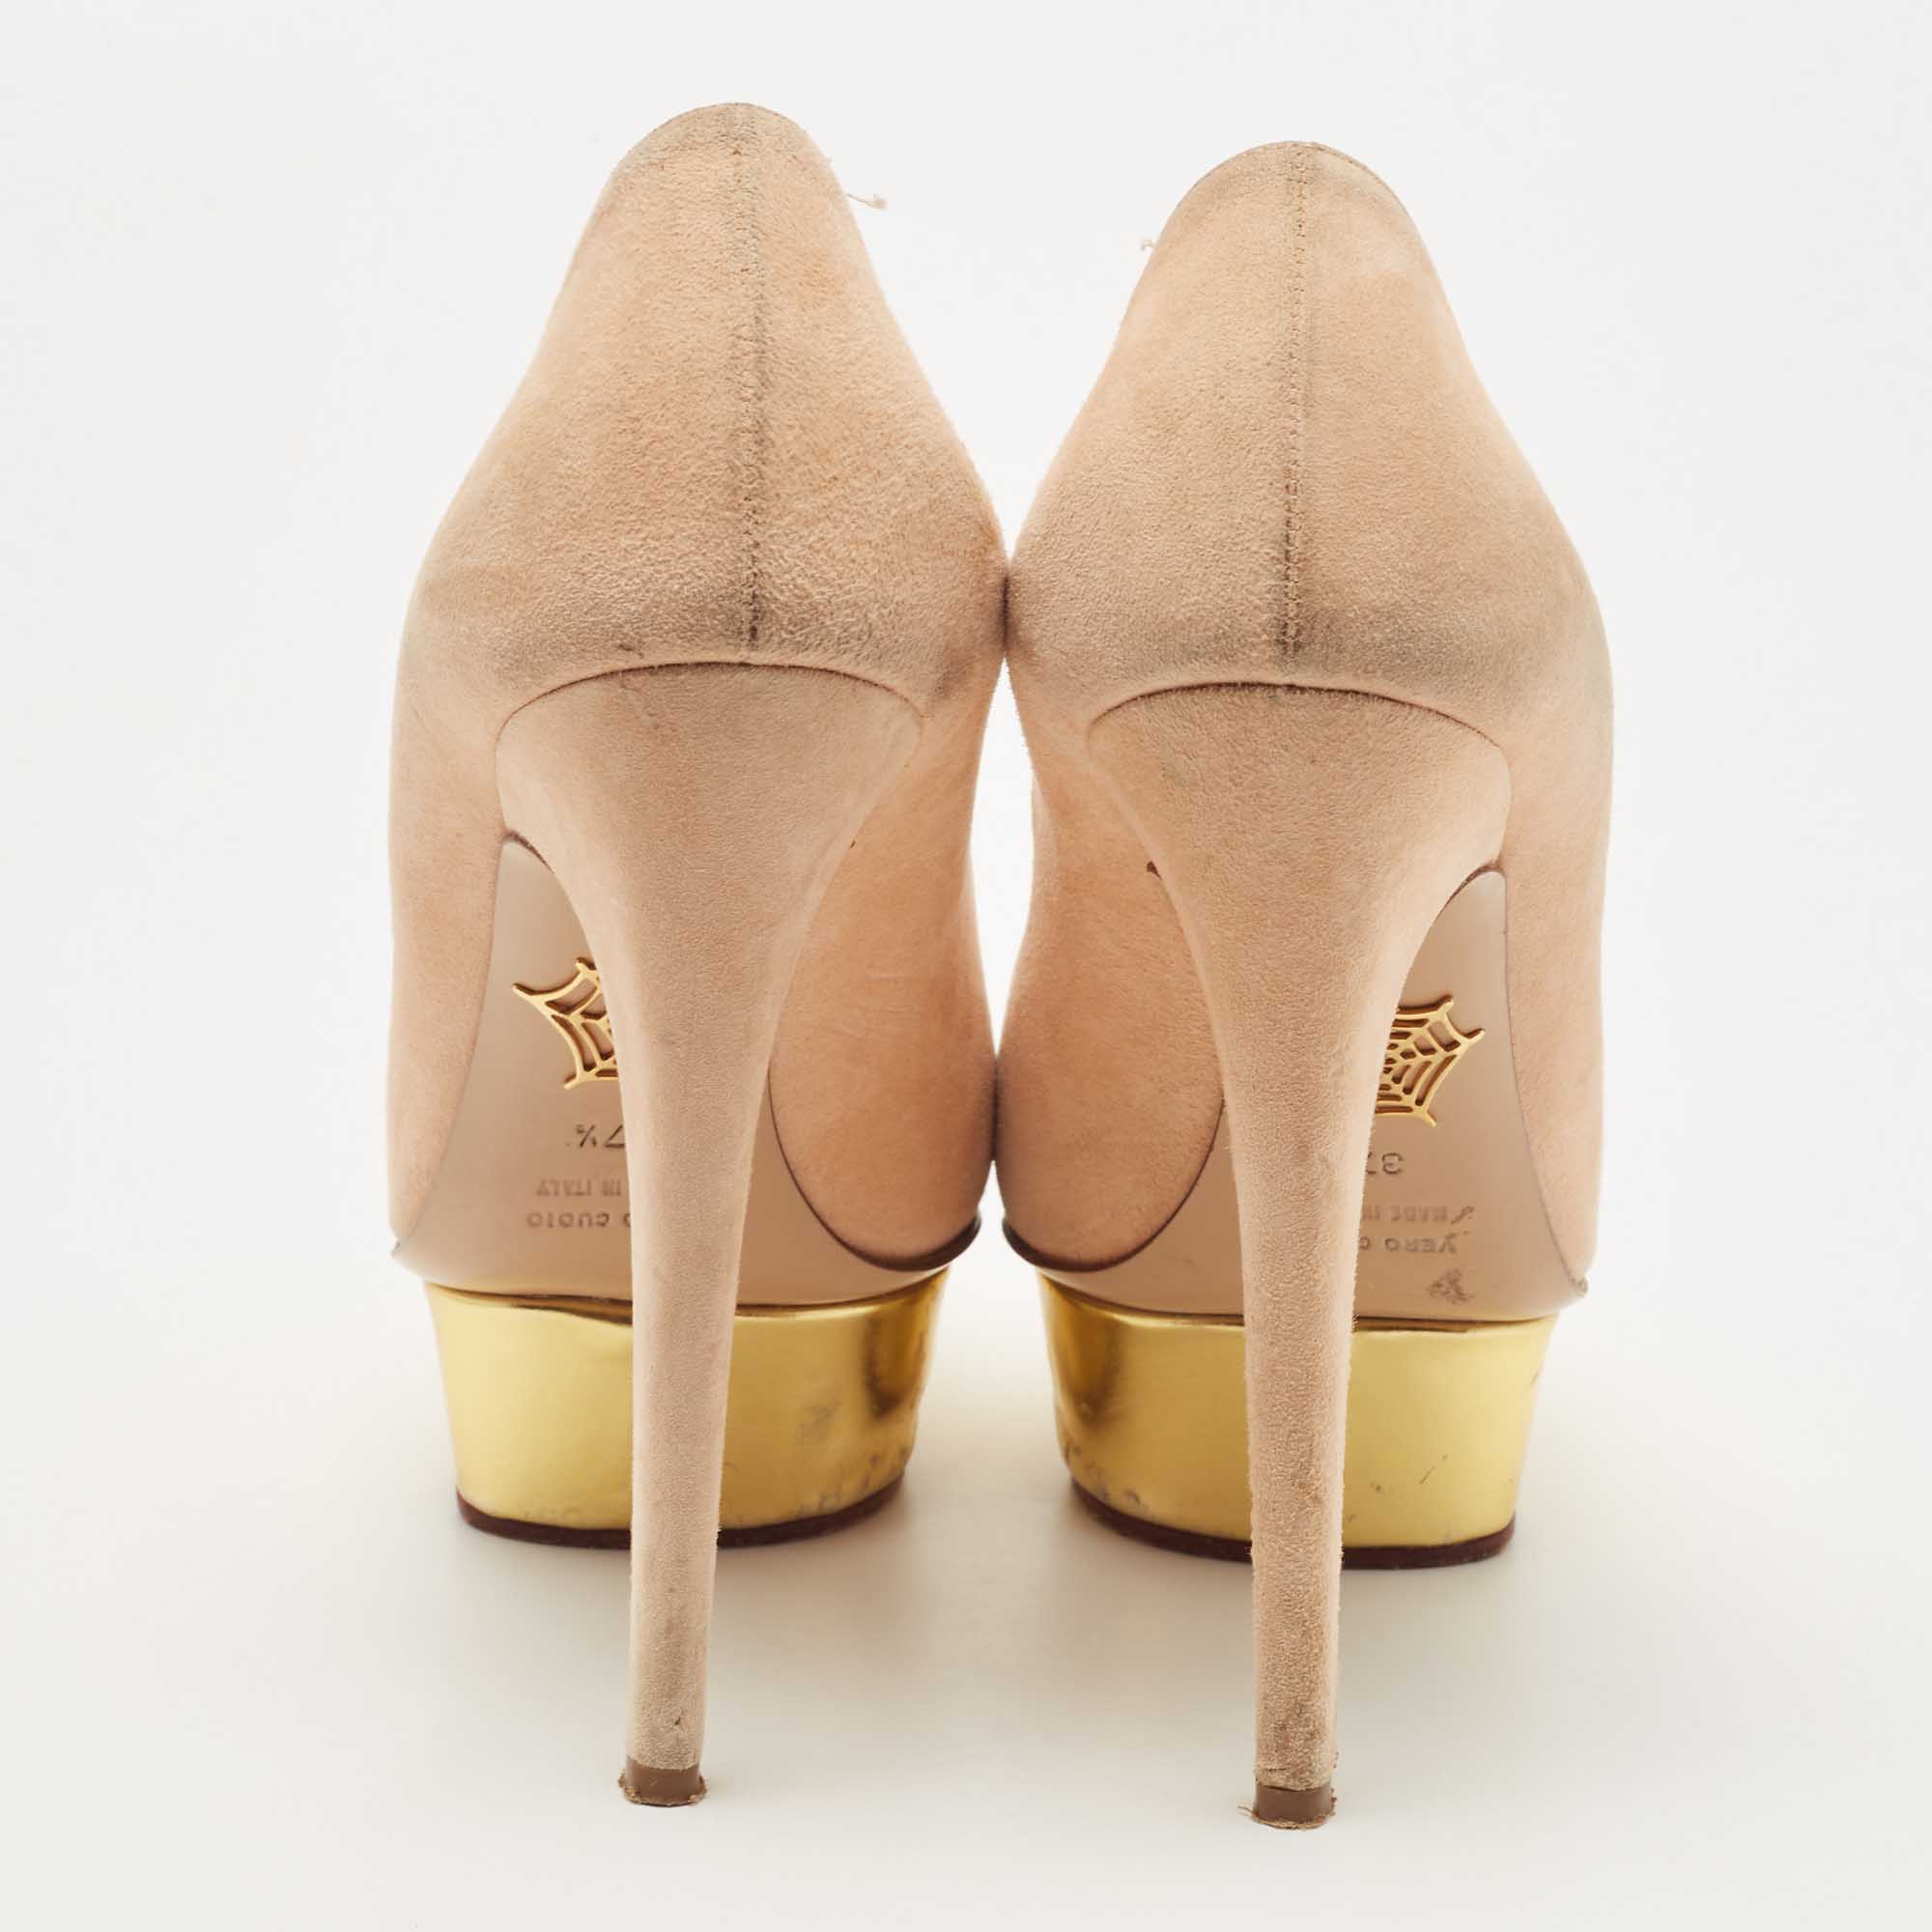 Charlotte Olympia Beige Suede Dolly Platform Pumps Size 37.5